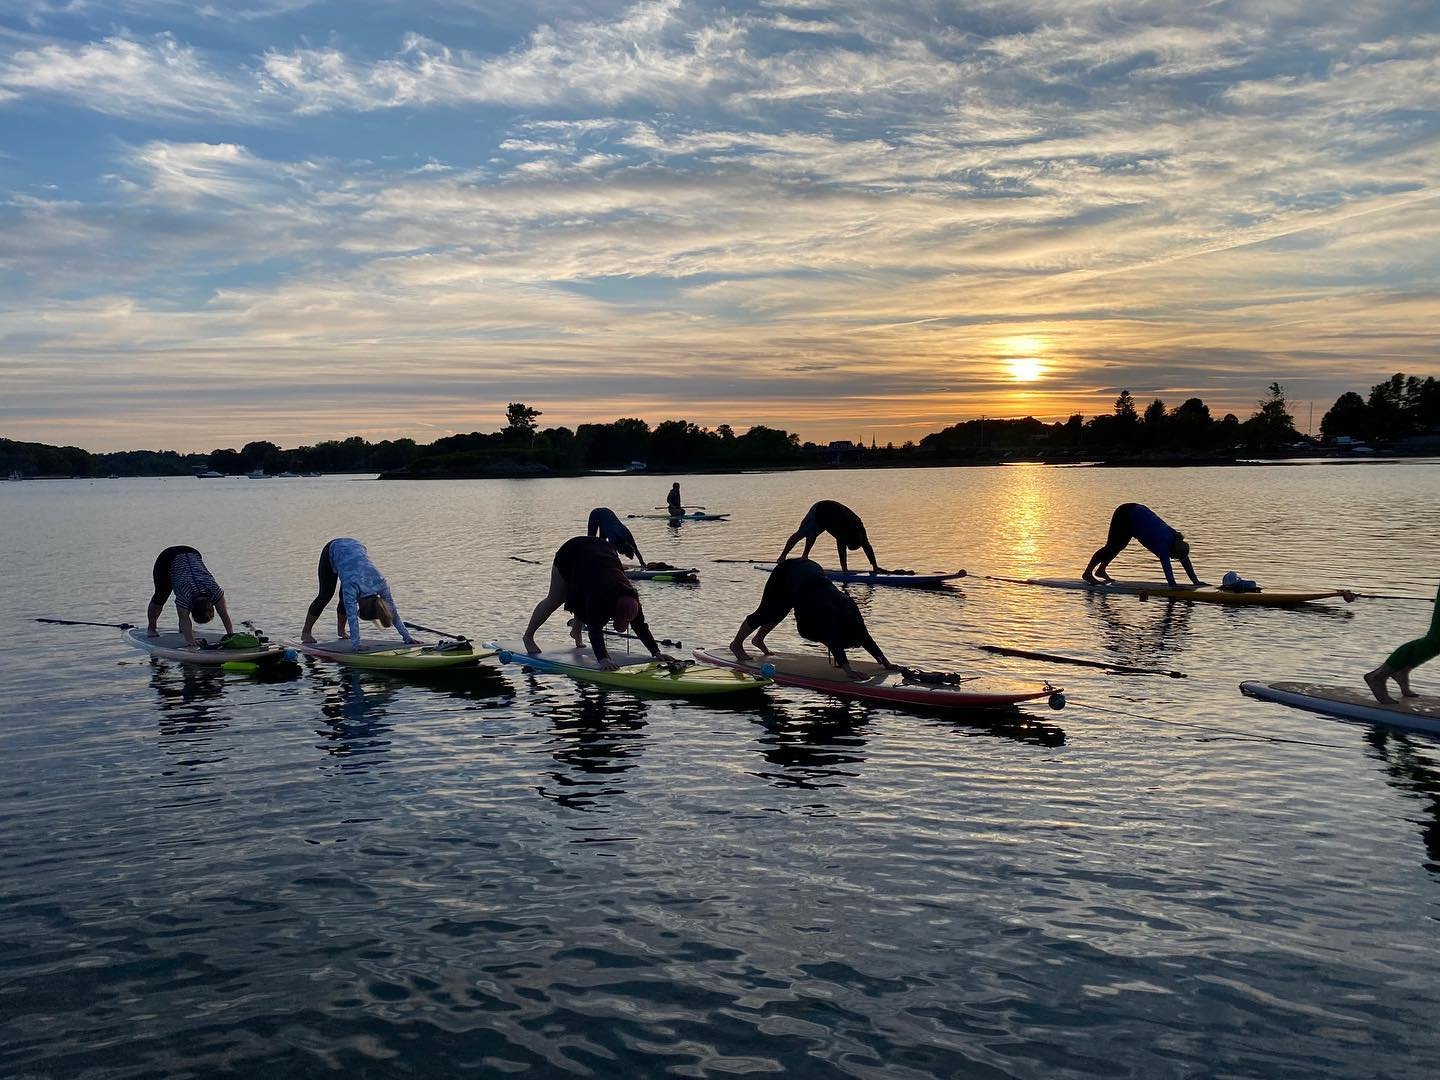 One last opportunity to practice on the sea under the gentle rays of the sunset&hellip;

&hellip;until next season, that is!

Join Jessica on Friday, September 8th at 5:45 PM for our final class of the SUP Yoga season. ☀️ We can&rsquo;t wait to meet 